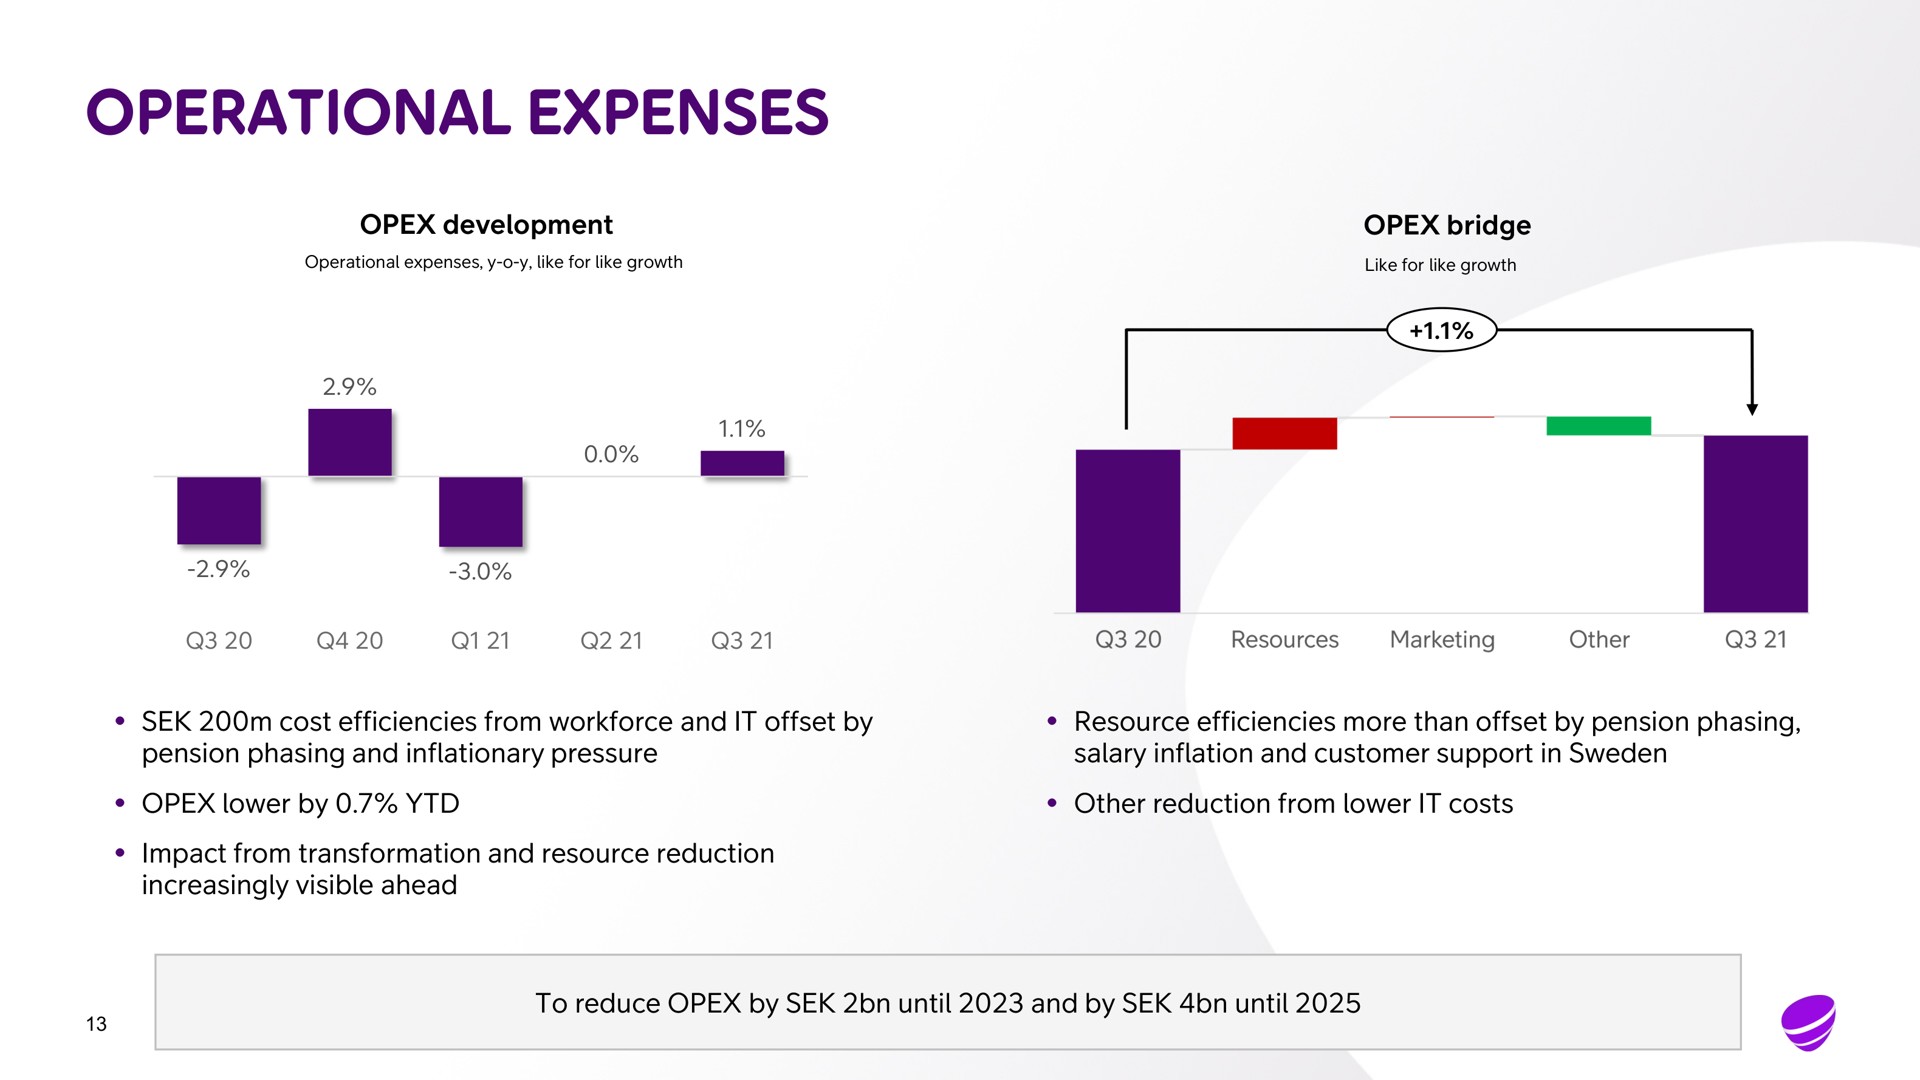 operational expenses development bridge cost efficiencies from and it offset by resource efficiencies more than offset by pension phasing pension phasing and inflationary pressure salary inflation and customer support in lower by other reduction from lower it costs impact from transformation and resource reduction increasingly visible ahead to reduce by until and by until | Telia Company